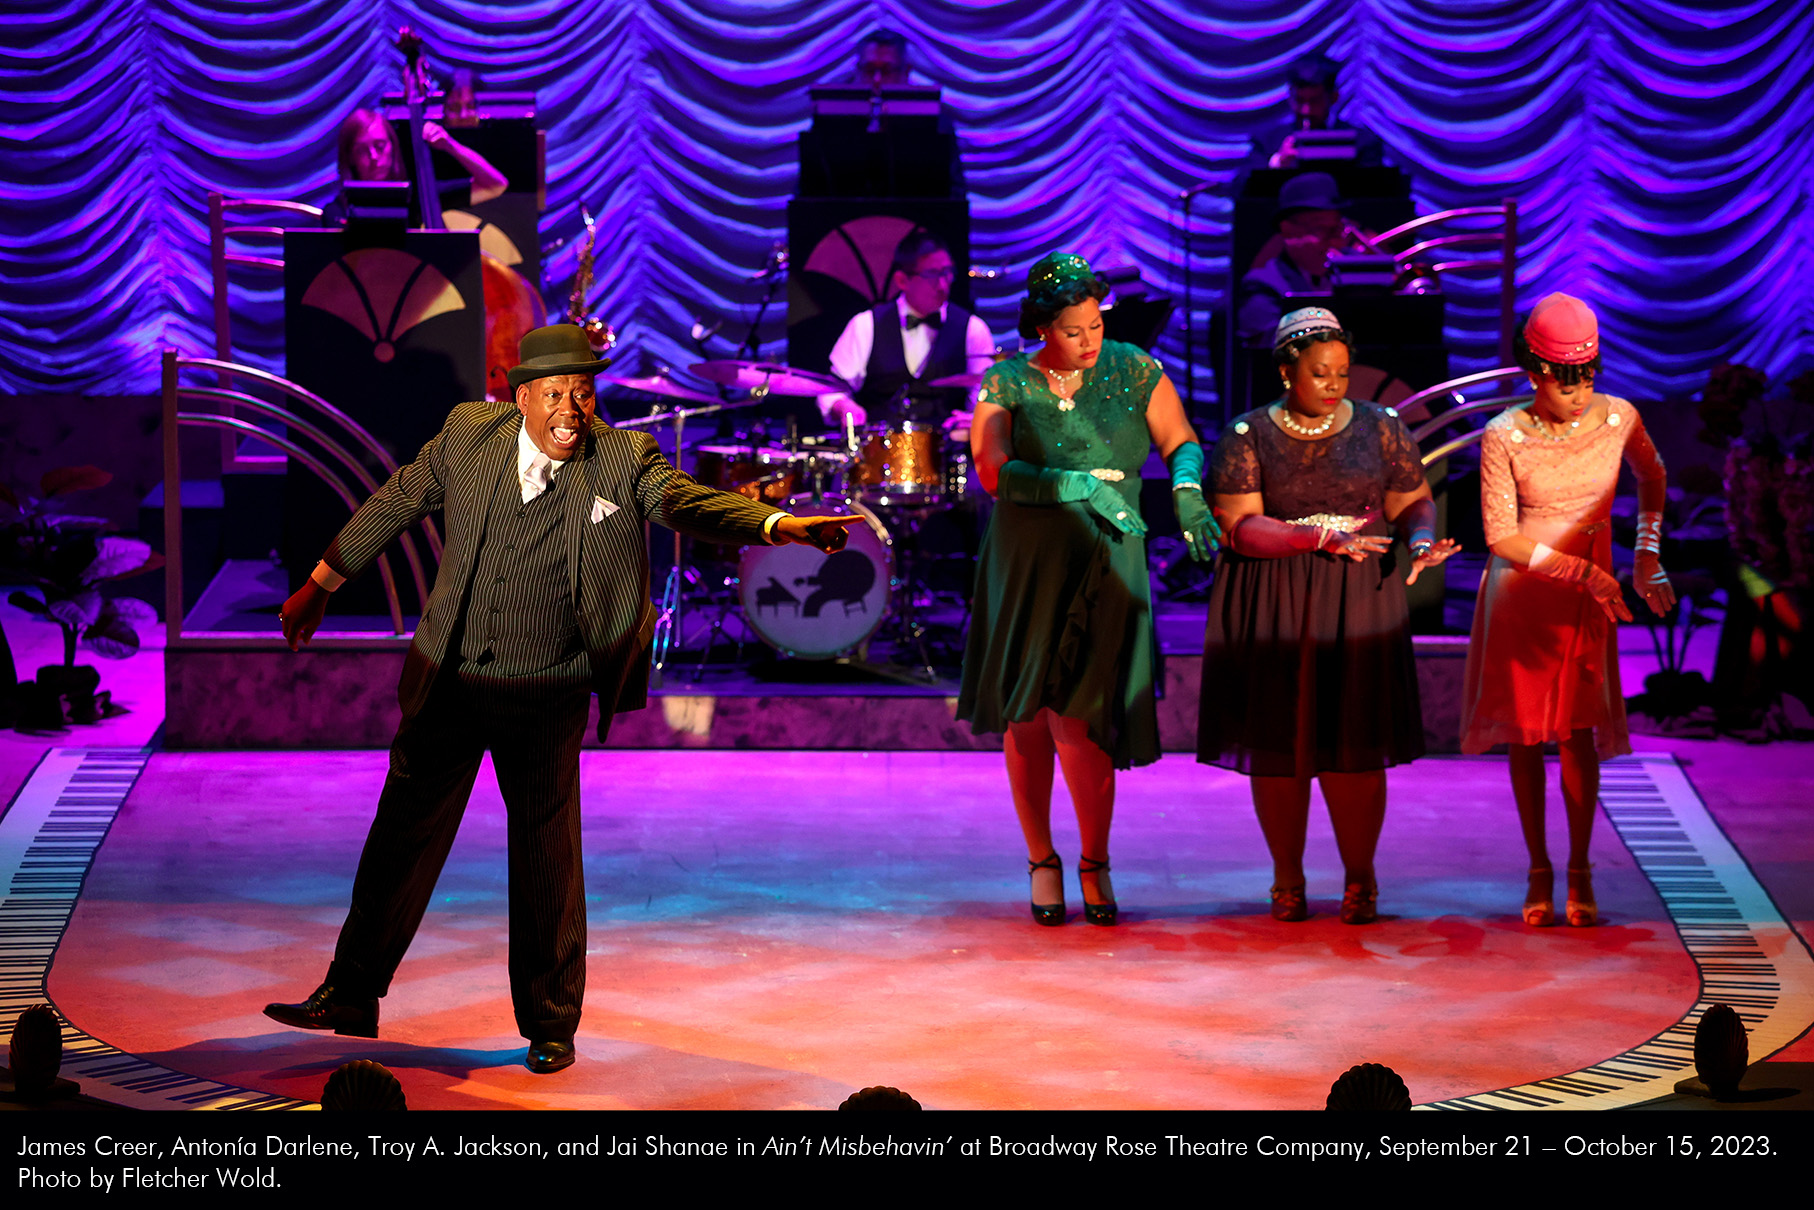 James Creer, Antonía Darlene, Troy A. Jackson, and Jai Shane in Ain't Misbehavin' at Broadway Rose Theatre Company, September 21 - October 15, 2023. Photo by Fletcher Wold.